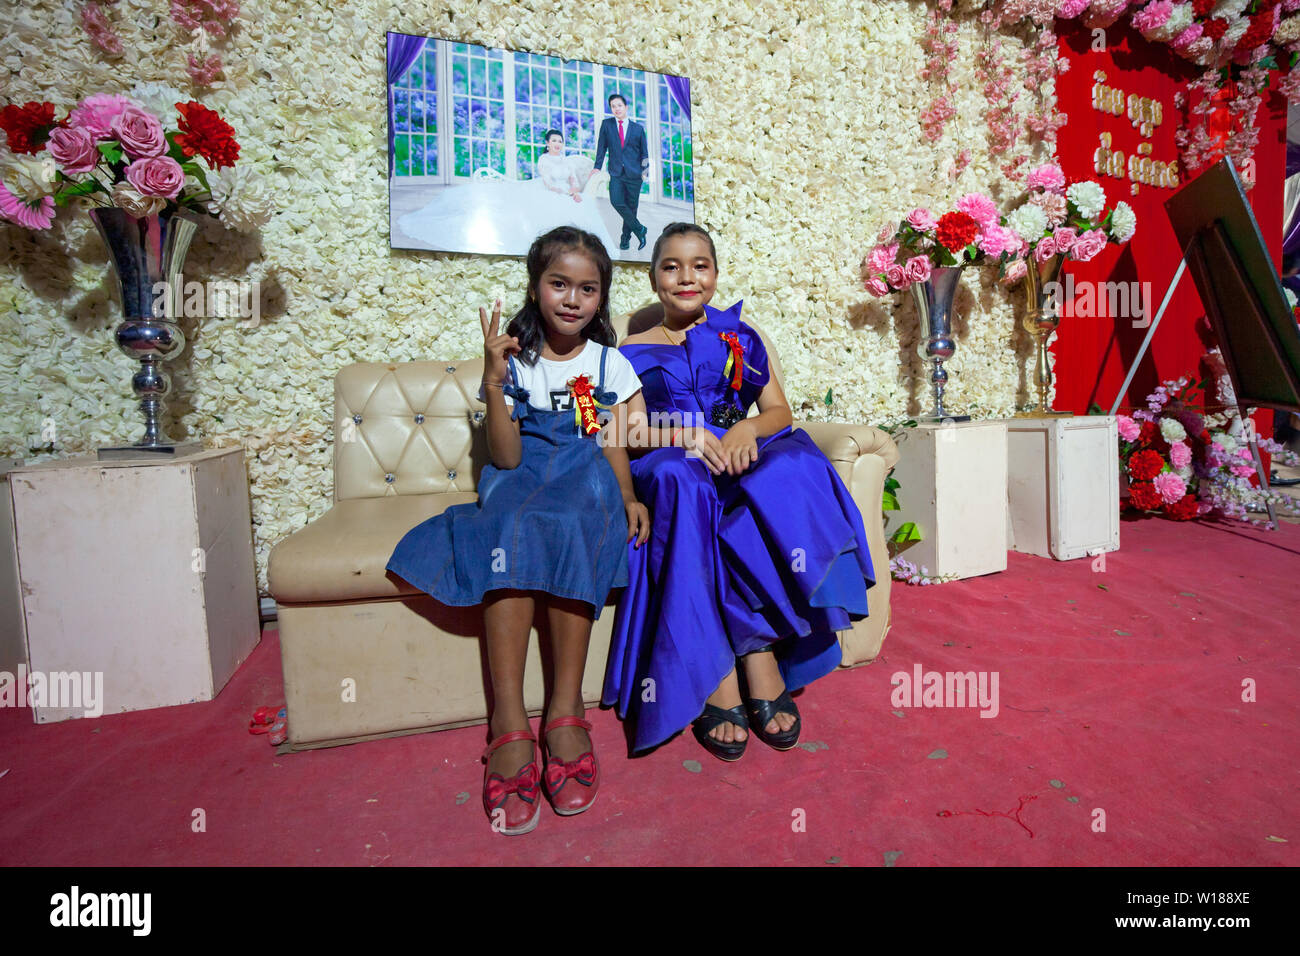 Two young Cambodian girls pose for a photo under a photograph depicting the bride & groom at a Khmer wedding ceremony in Siem Reap, Cambodia. Stock Photo